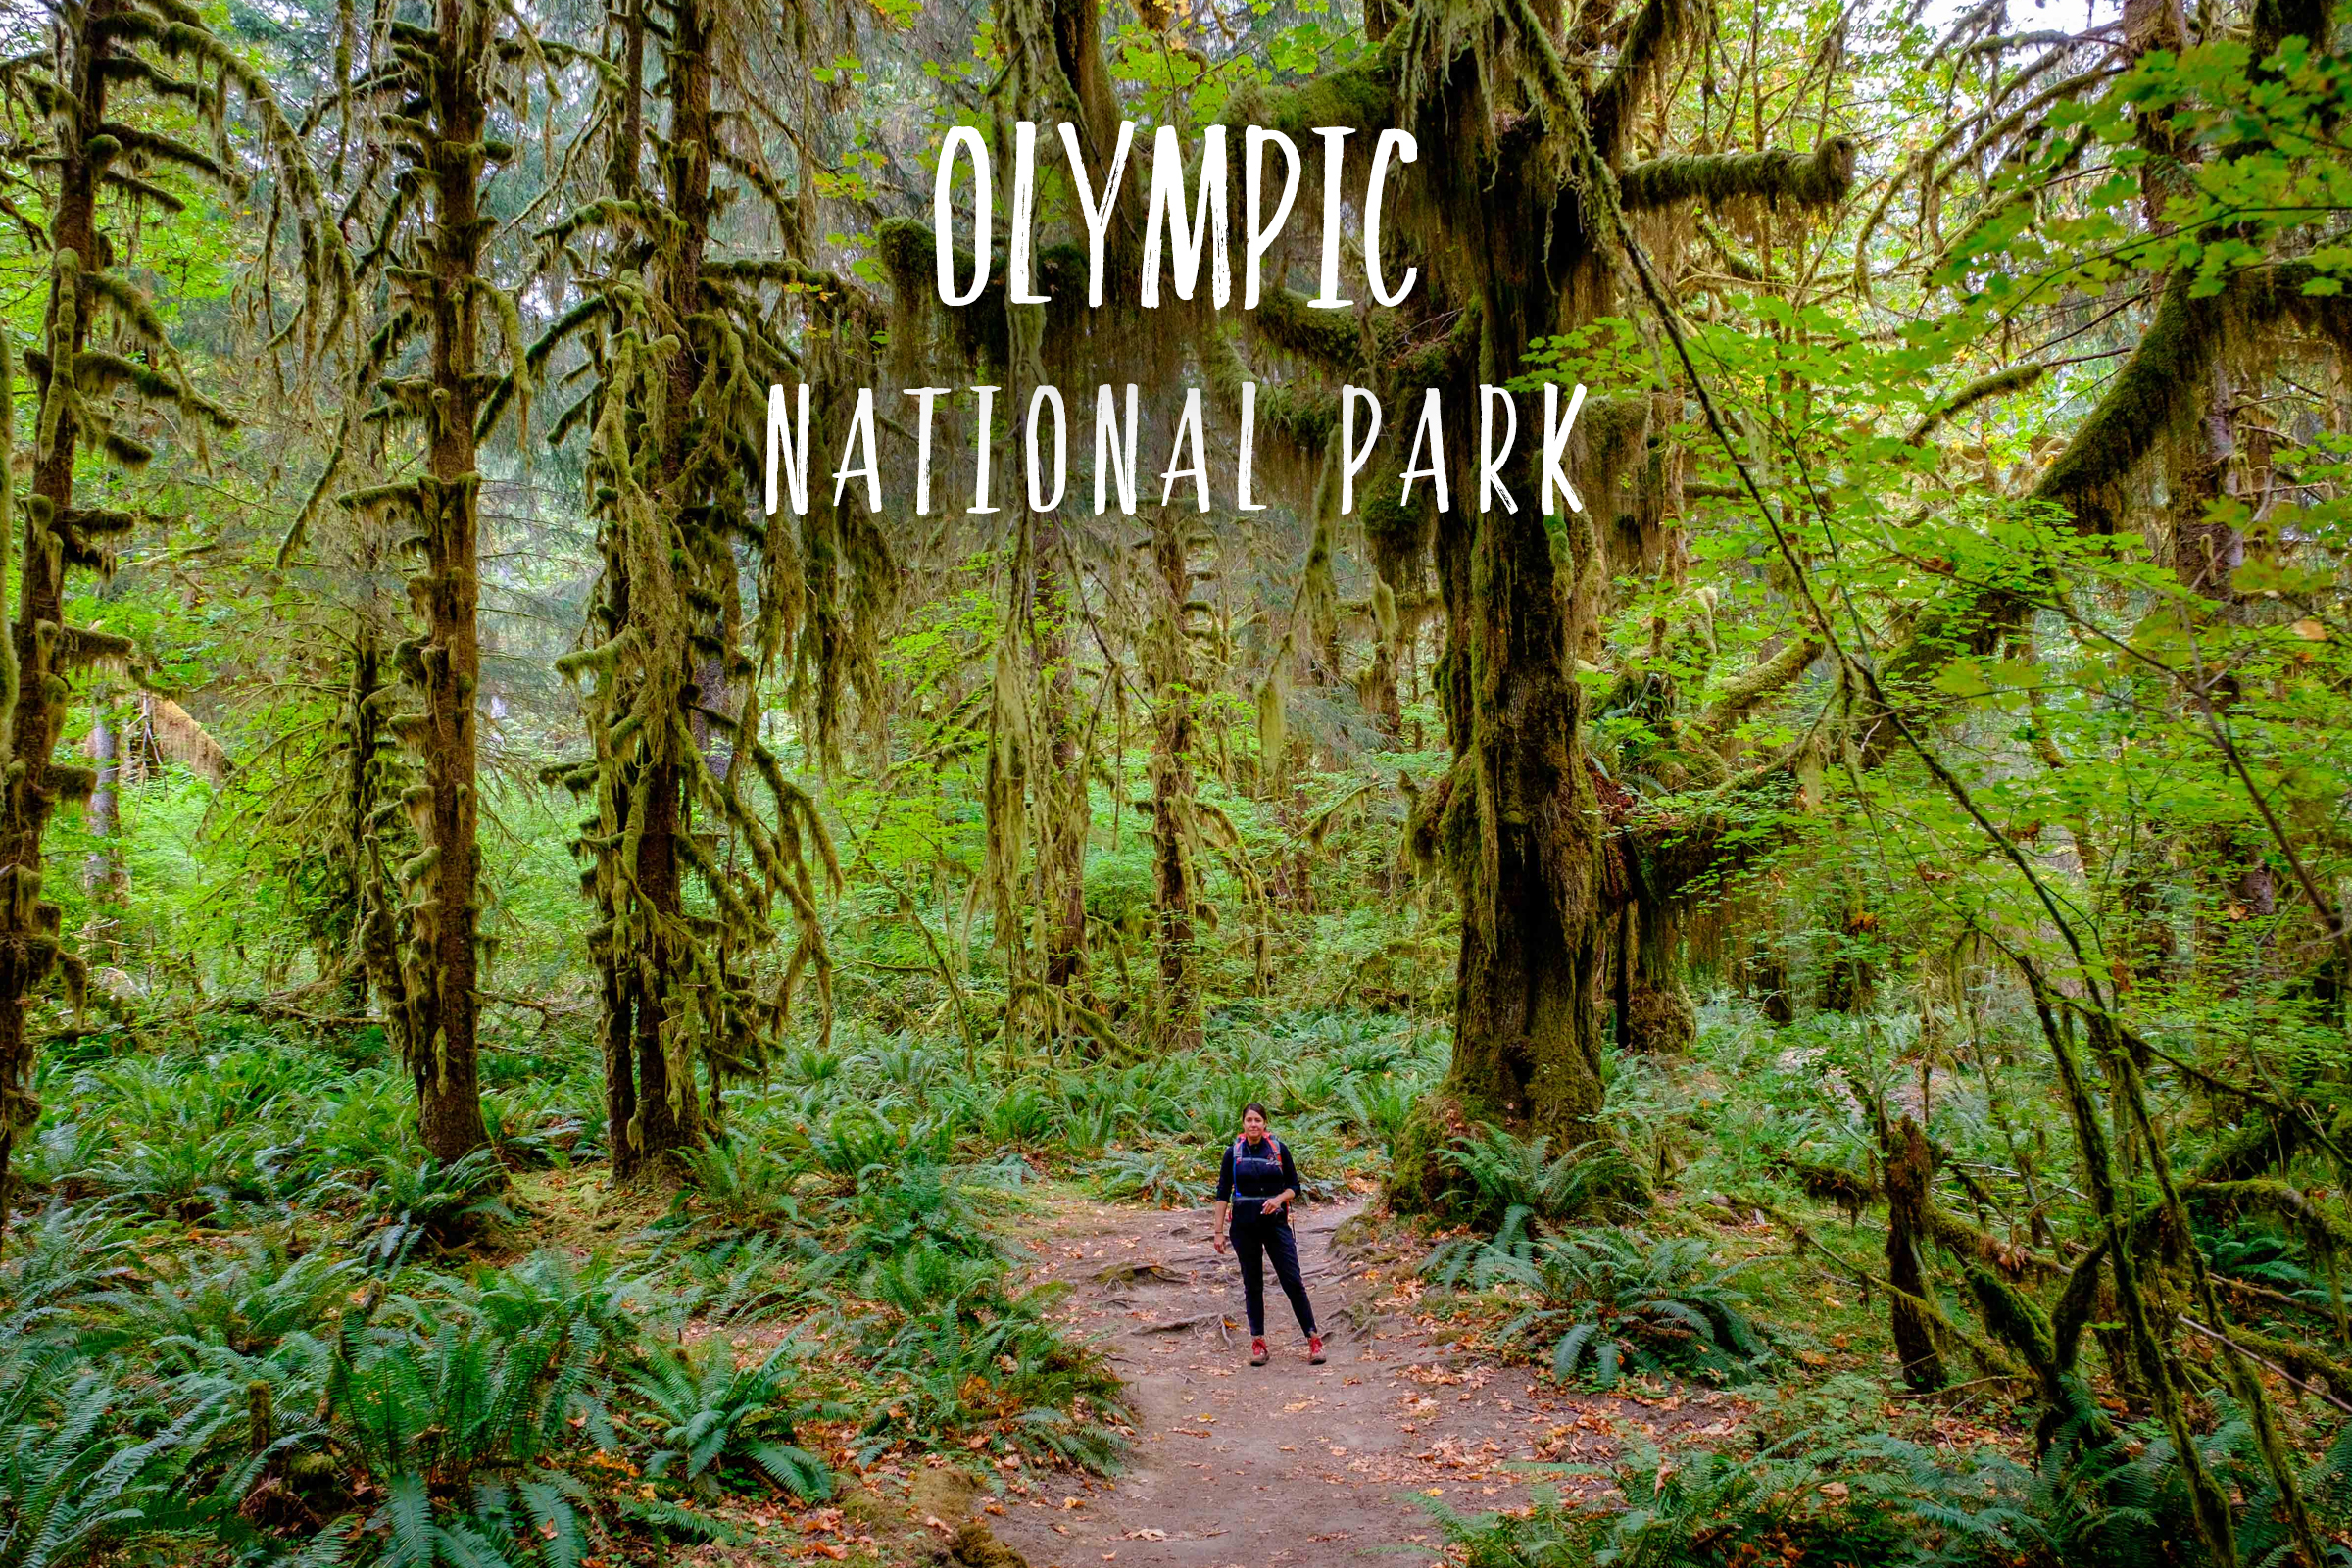 Park 38/59: Olympic National Park in Washington state